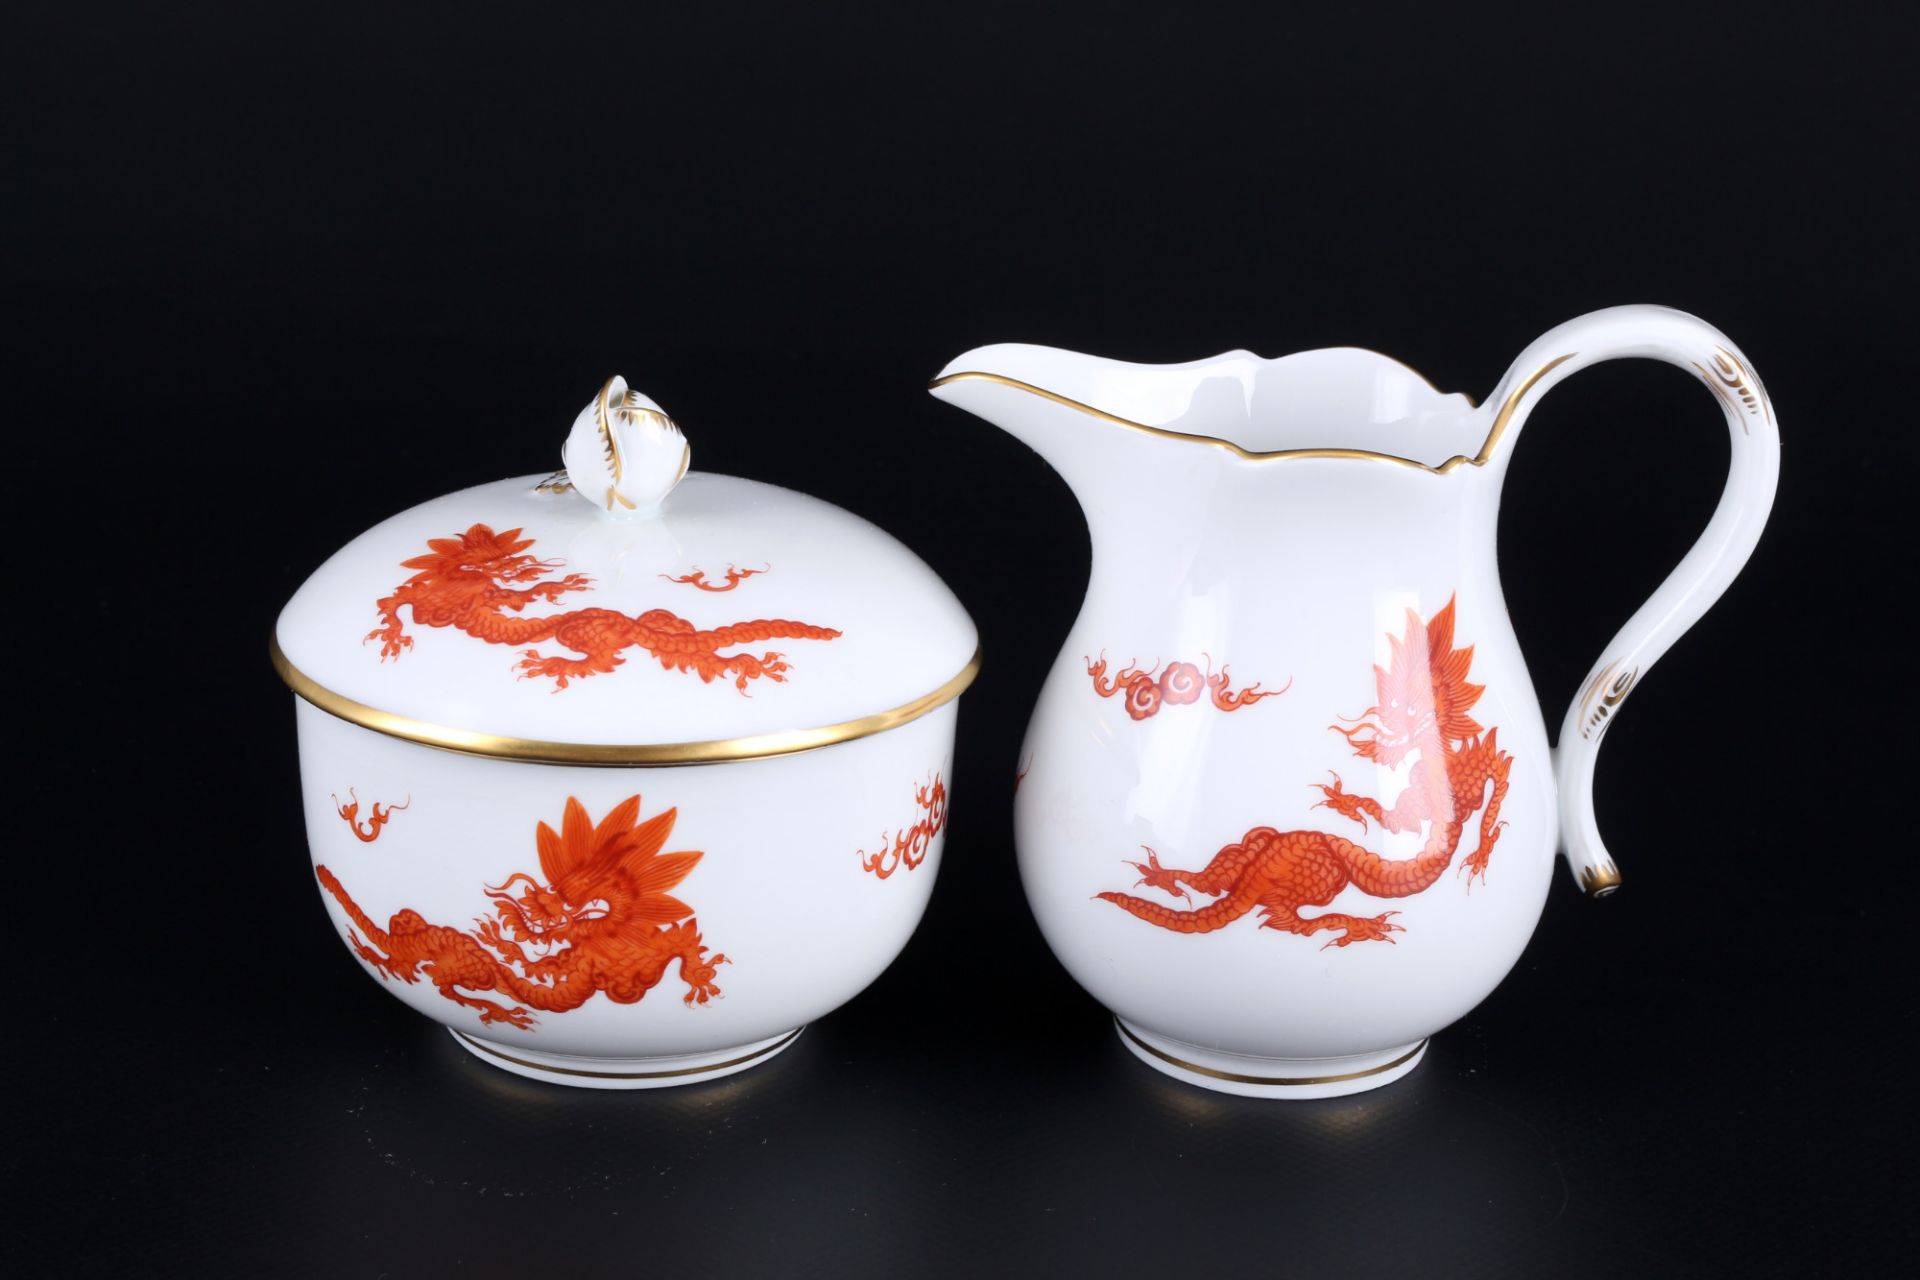 Meissen Red Ming Dragon coffee service for 6 persons 1st choice, Kaffeeservice für 6 Personen 1.Wahl - Image 4 of 6